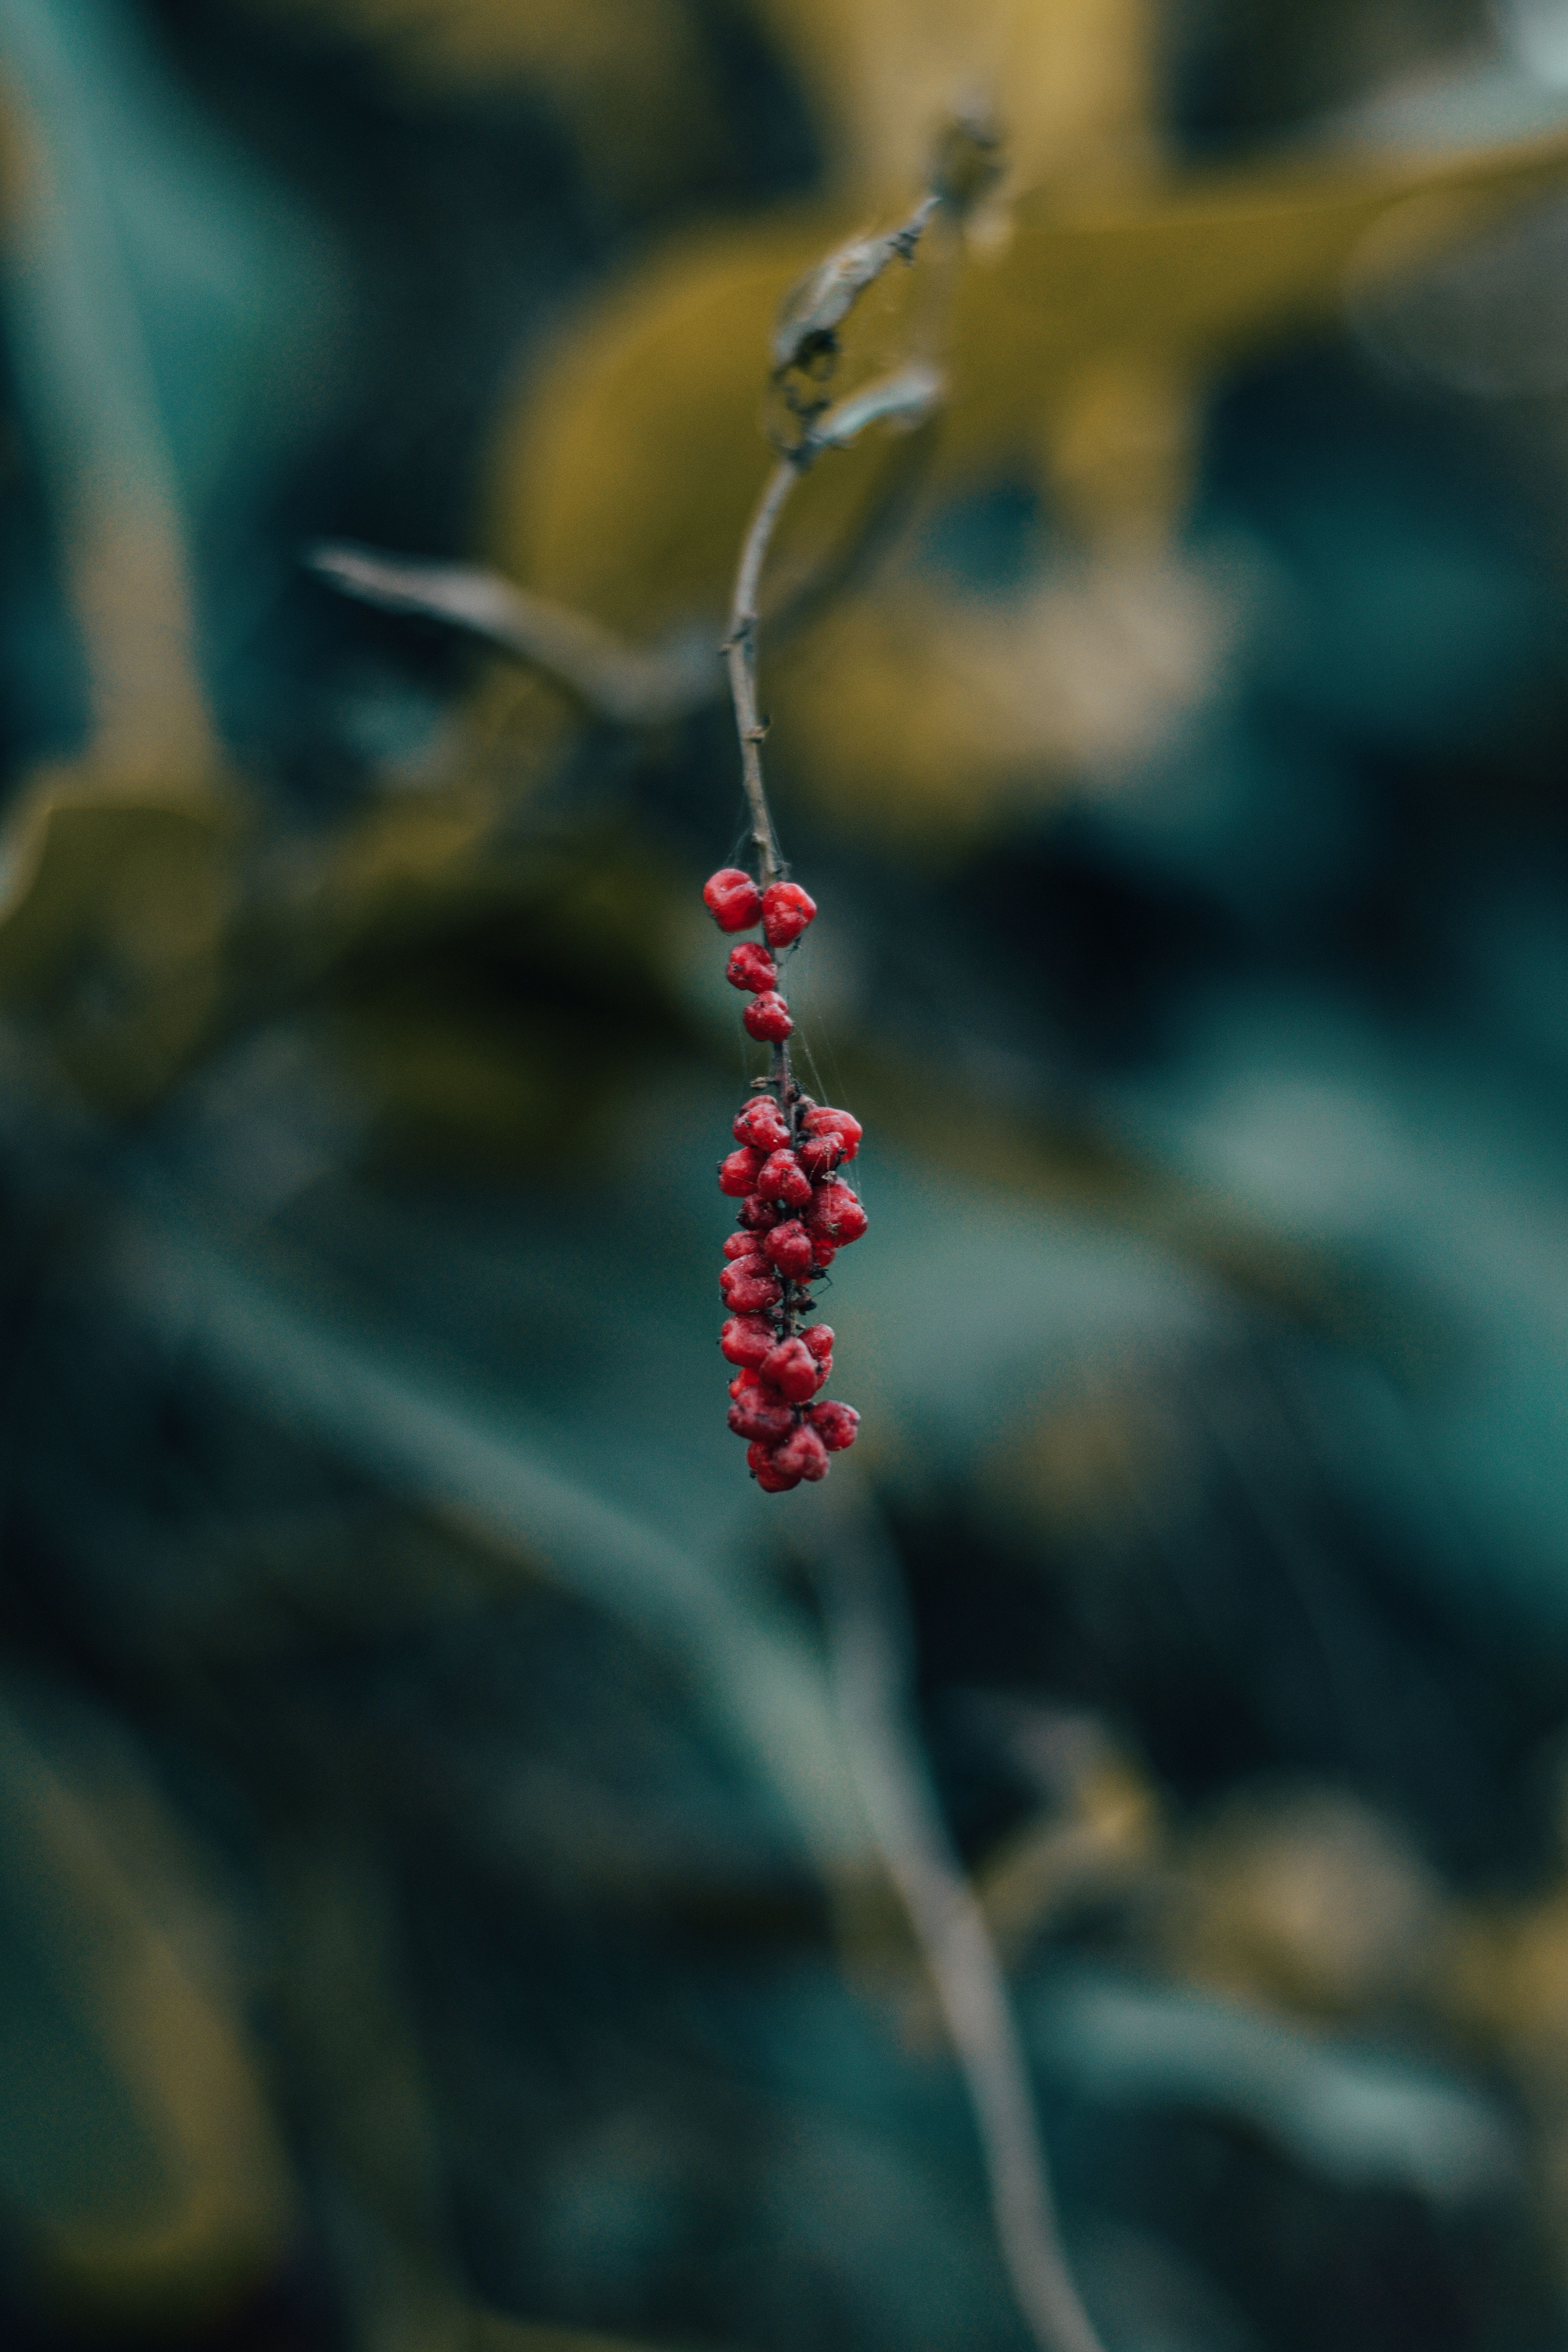 77567 download wallpaper macro, blur, smooth, branch, berry screensavers and pictures for free